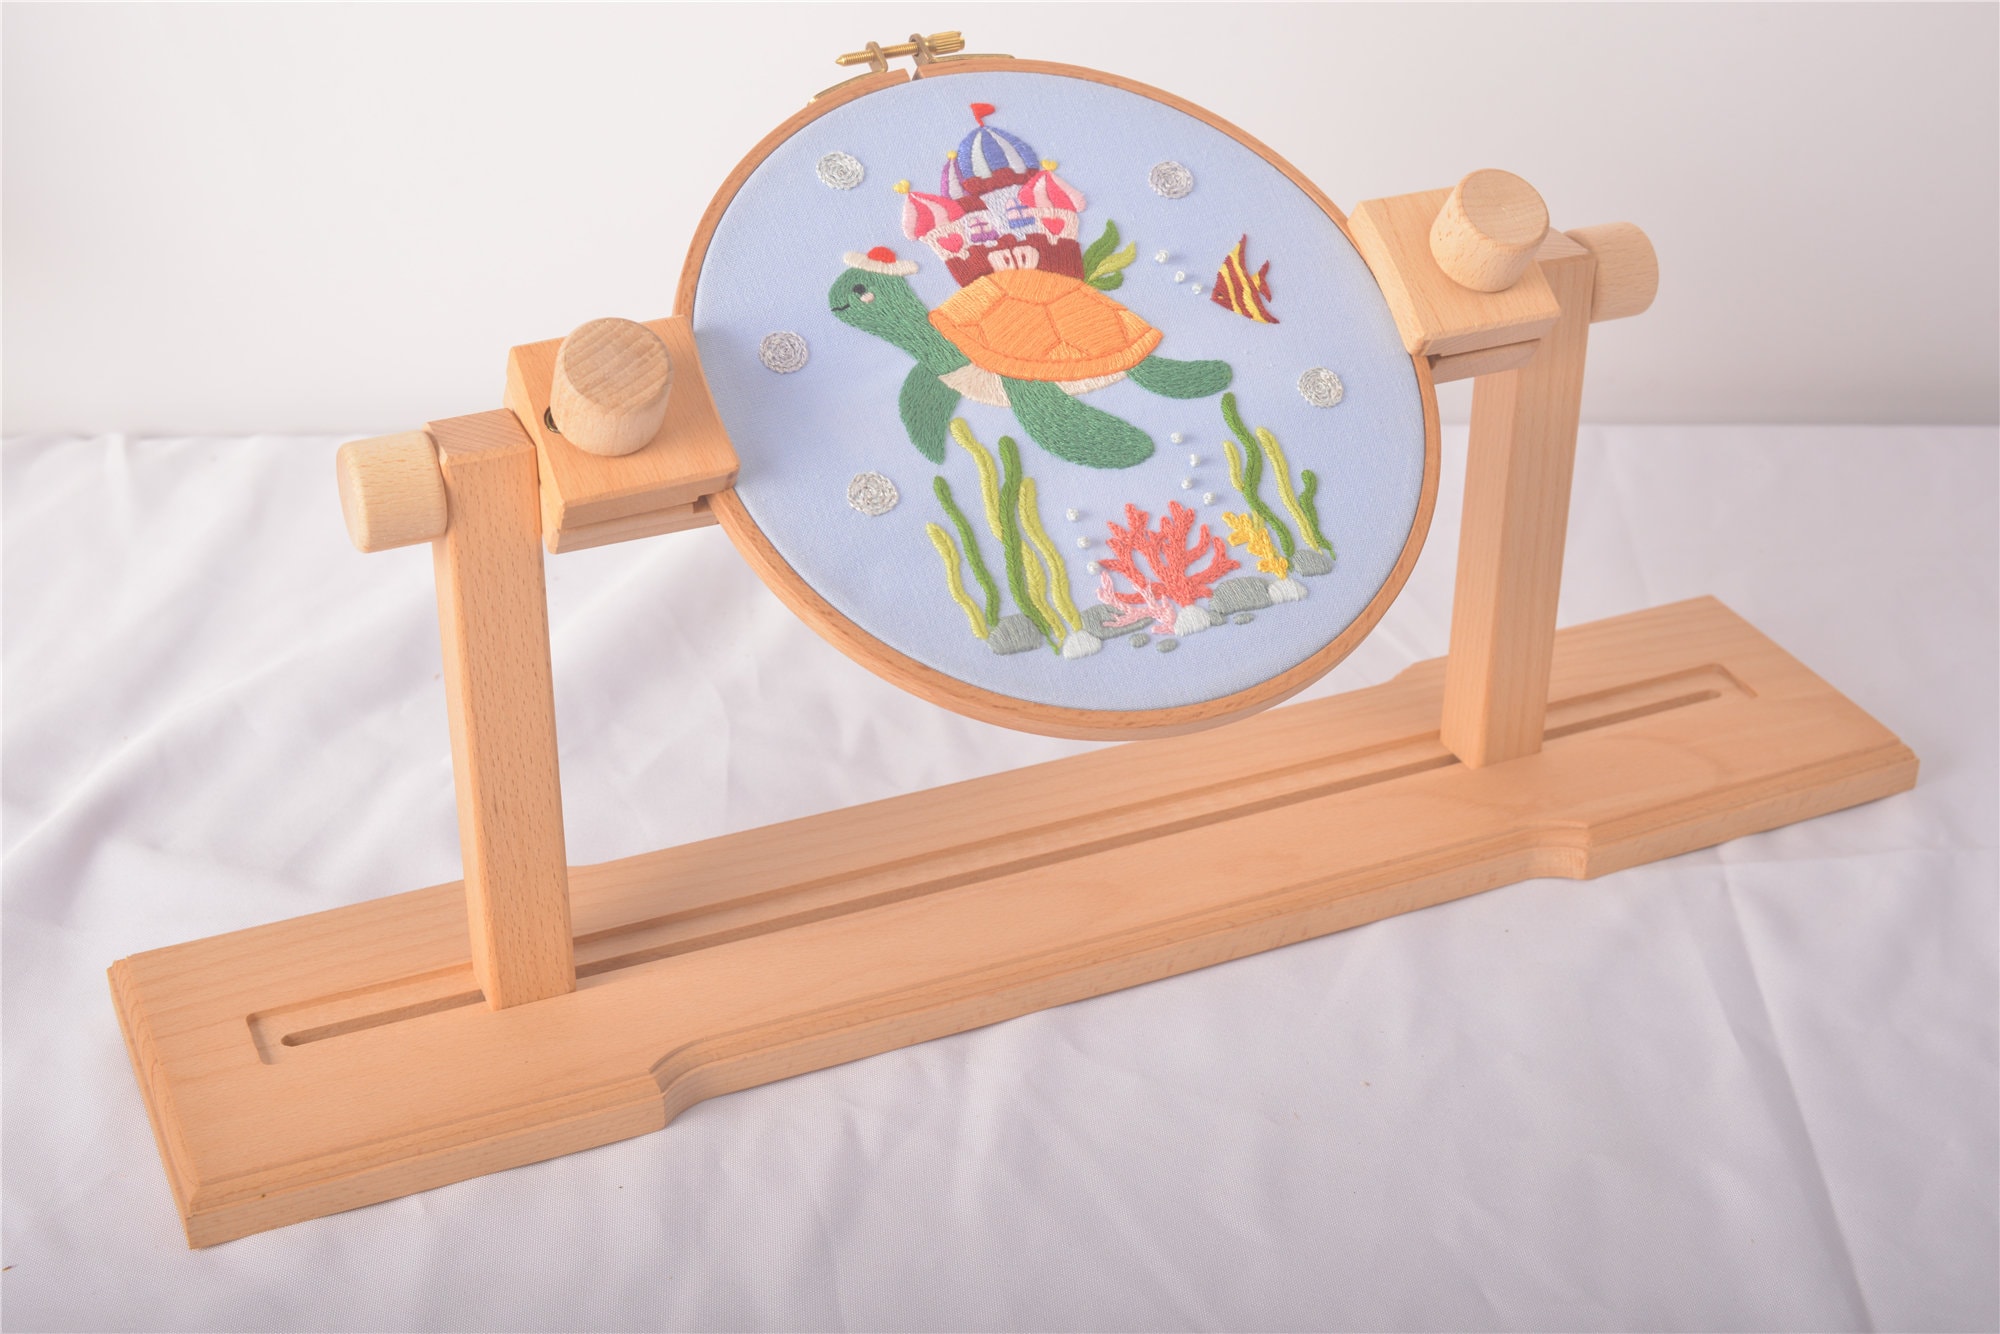 Table Embroidery Stand for Q-snap Frame, Wooden Cross Stitch Stand